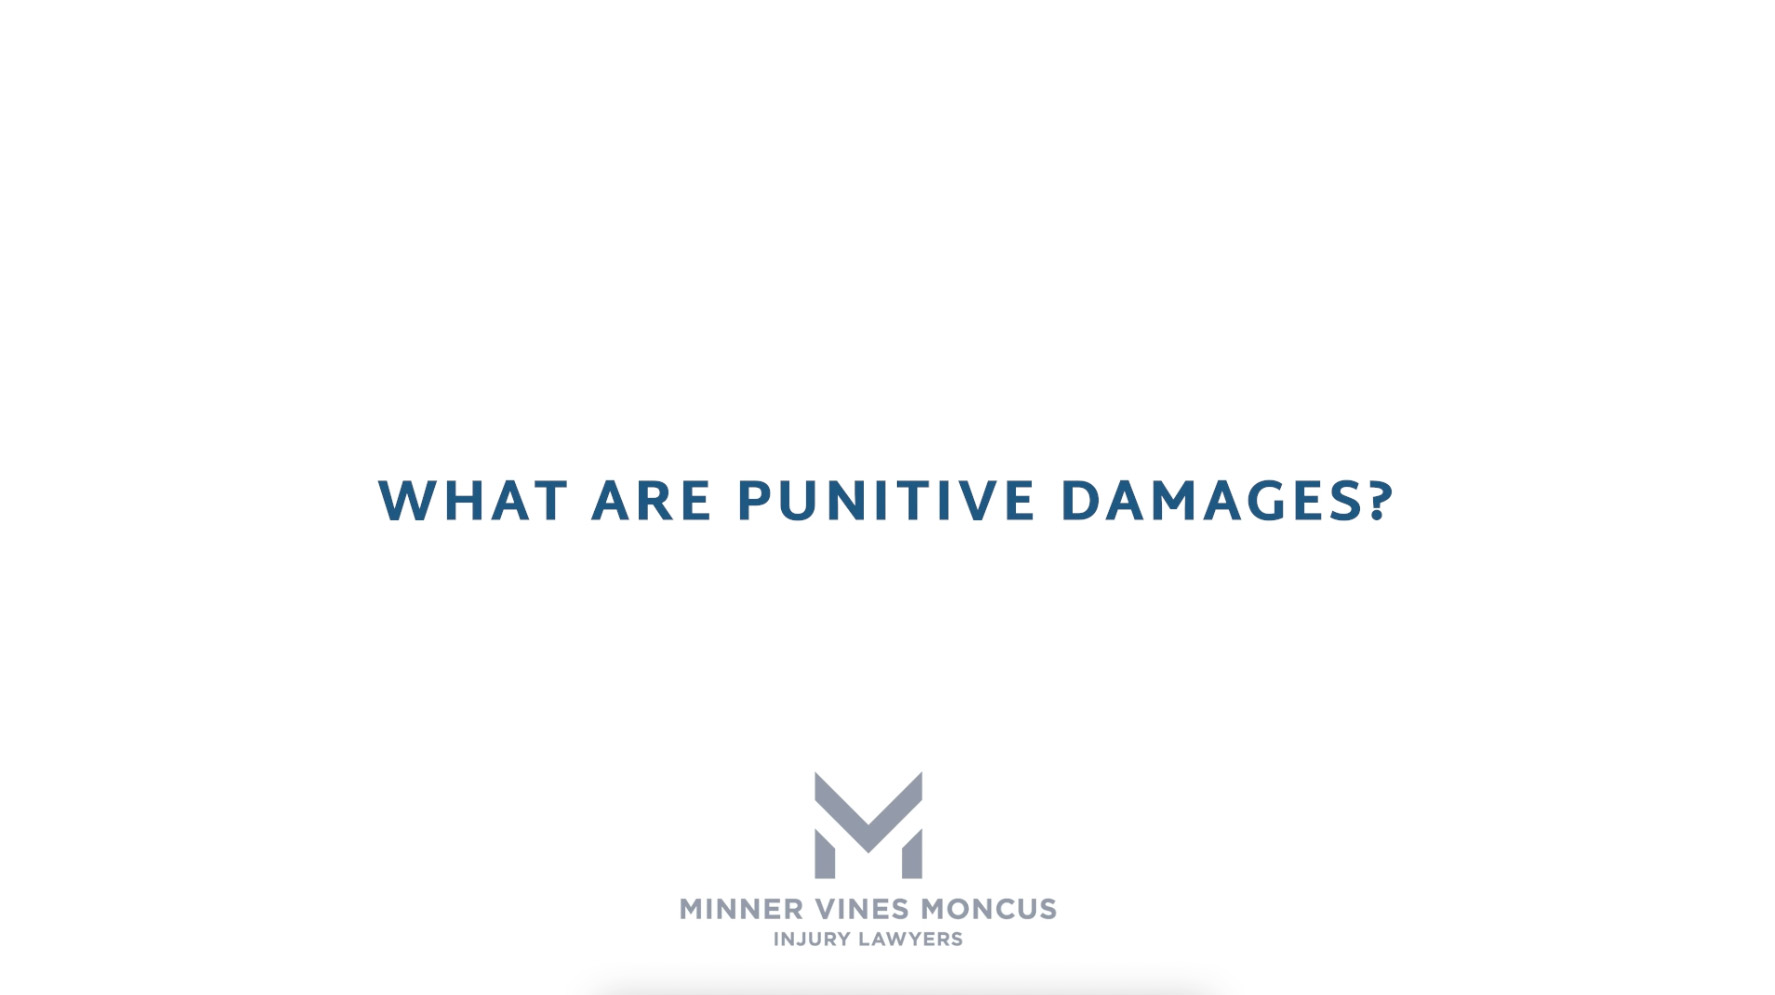 What are punitive damages?